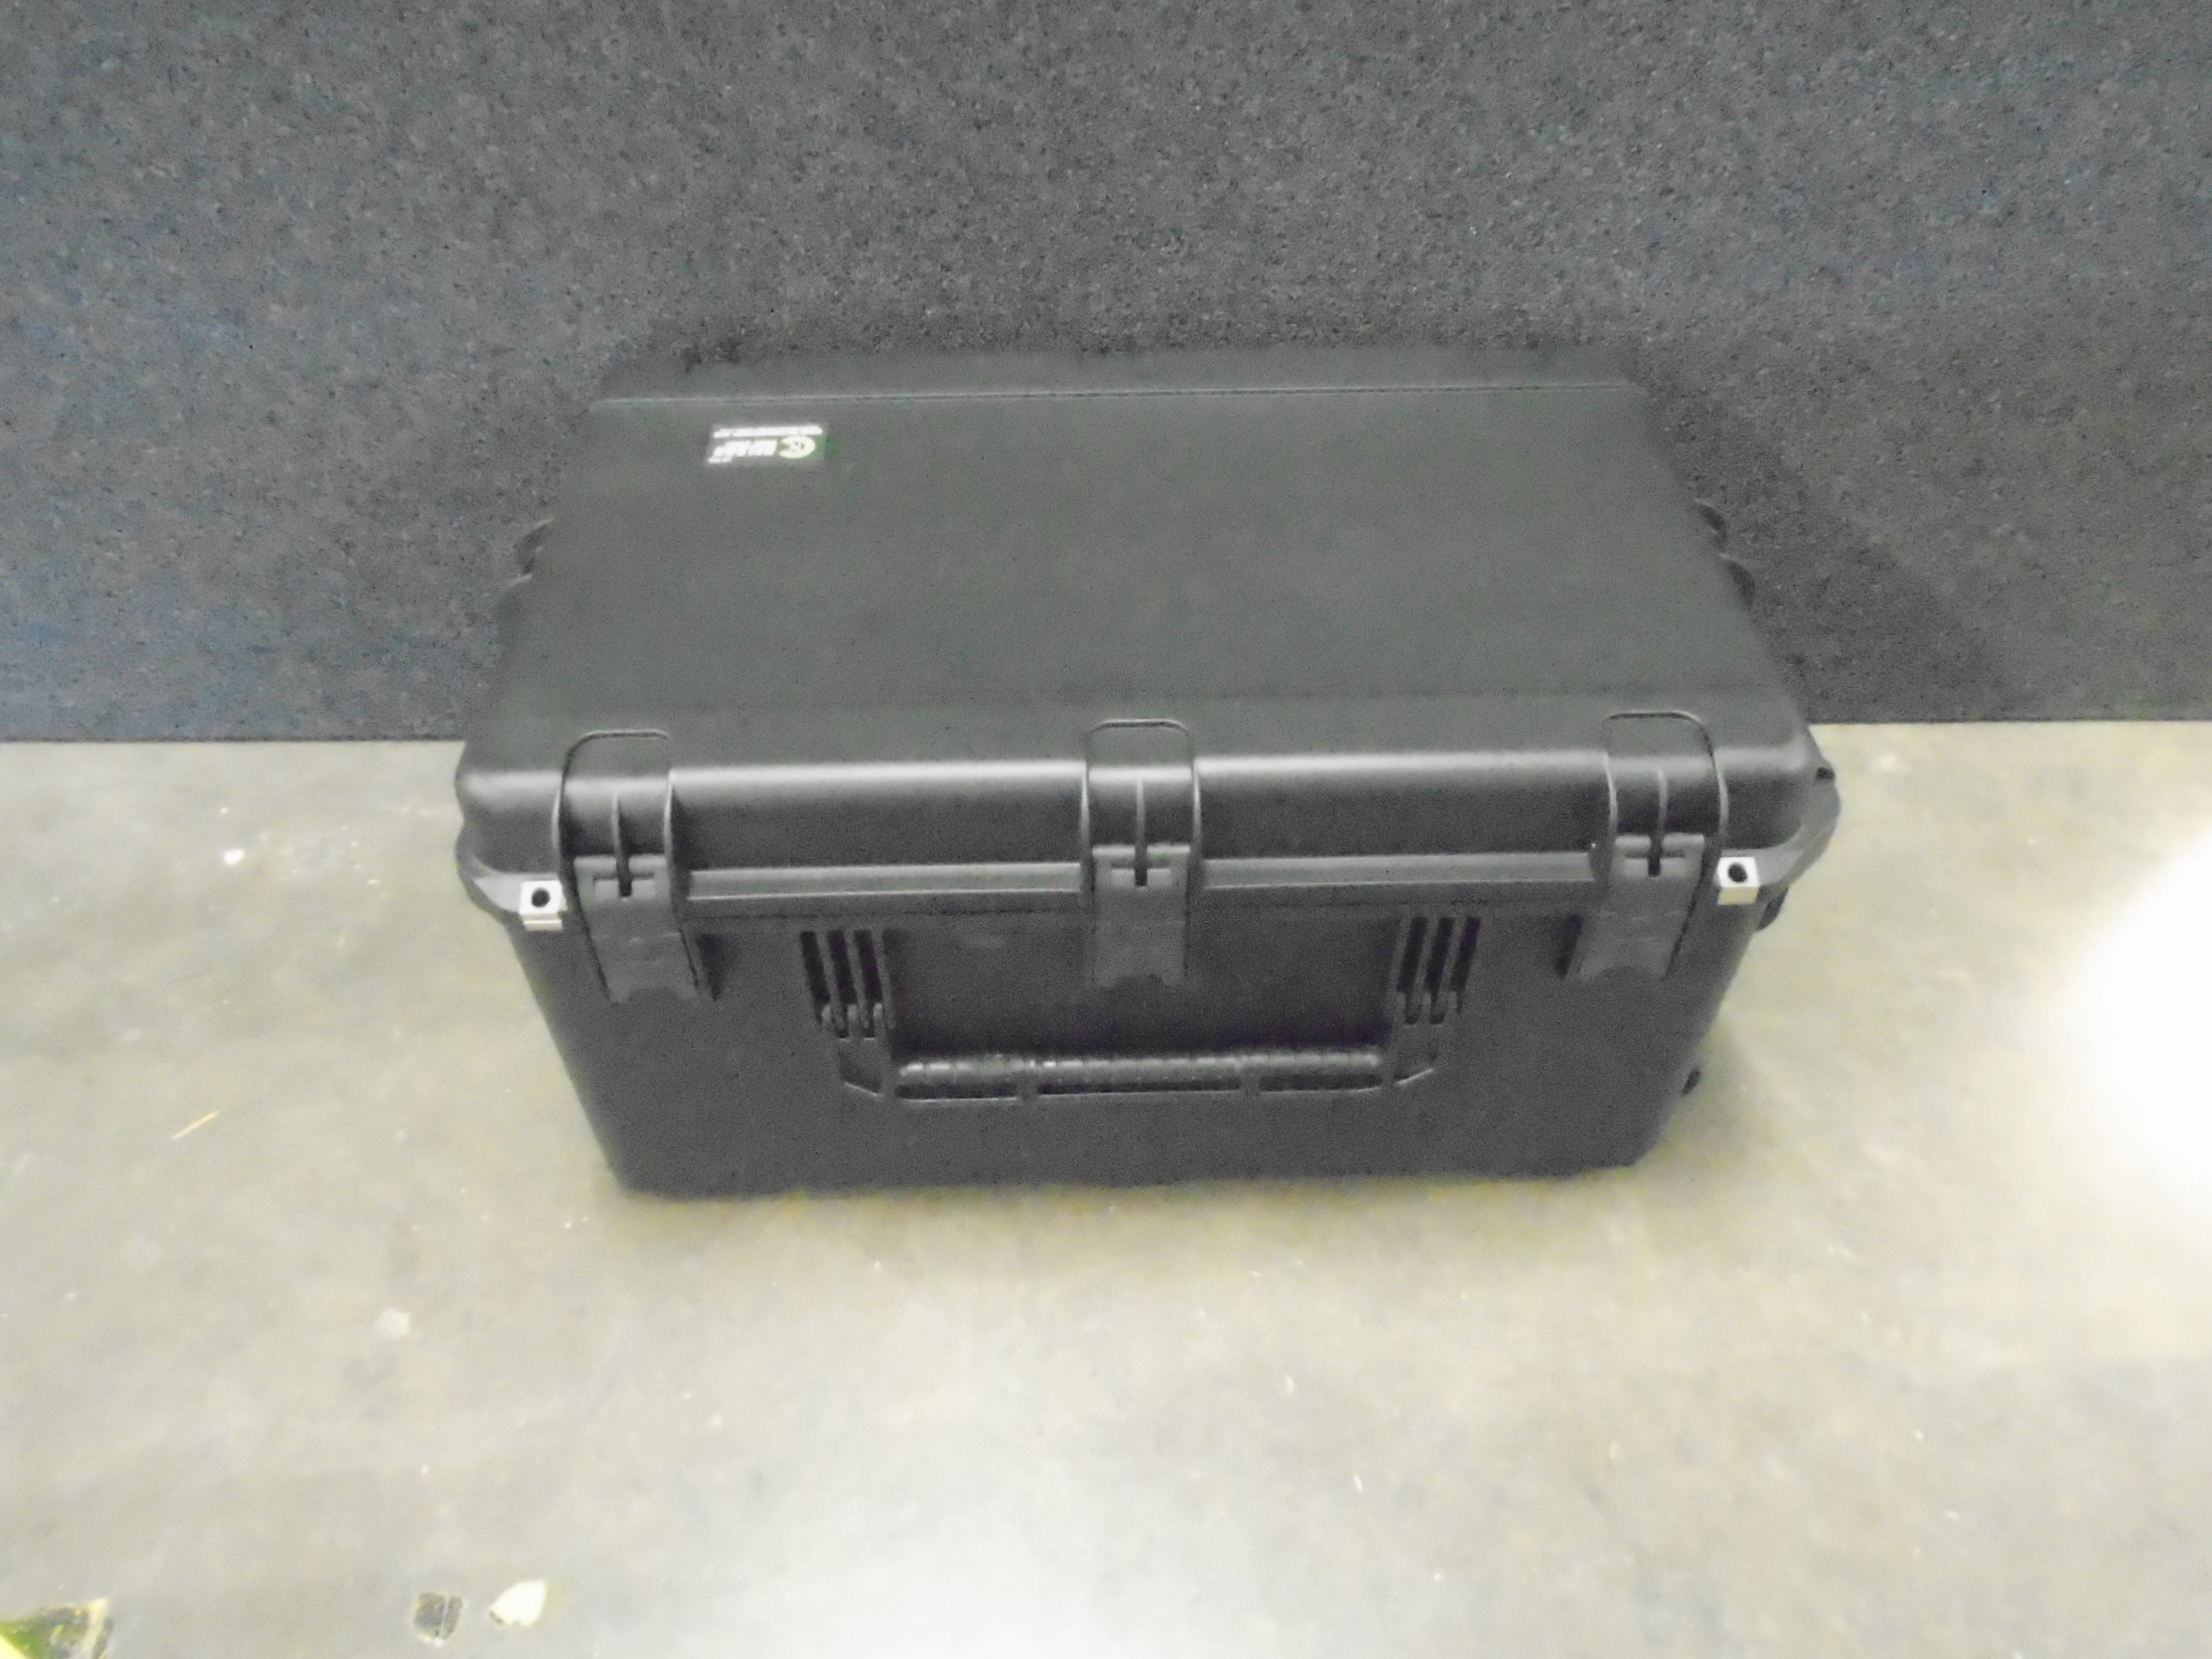 Print # 9273 - SKB 3i-2918-14 Retrofitted for Shure ULXD4Q-G50 2-Channel Wireless Receiver with 1-RU Rack Shell By Nelson Case Corp